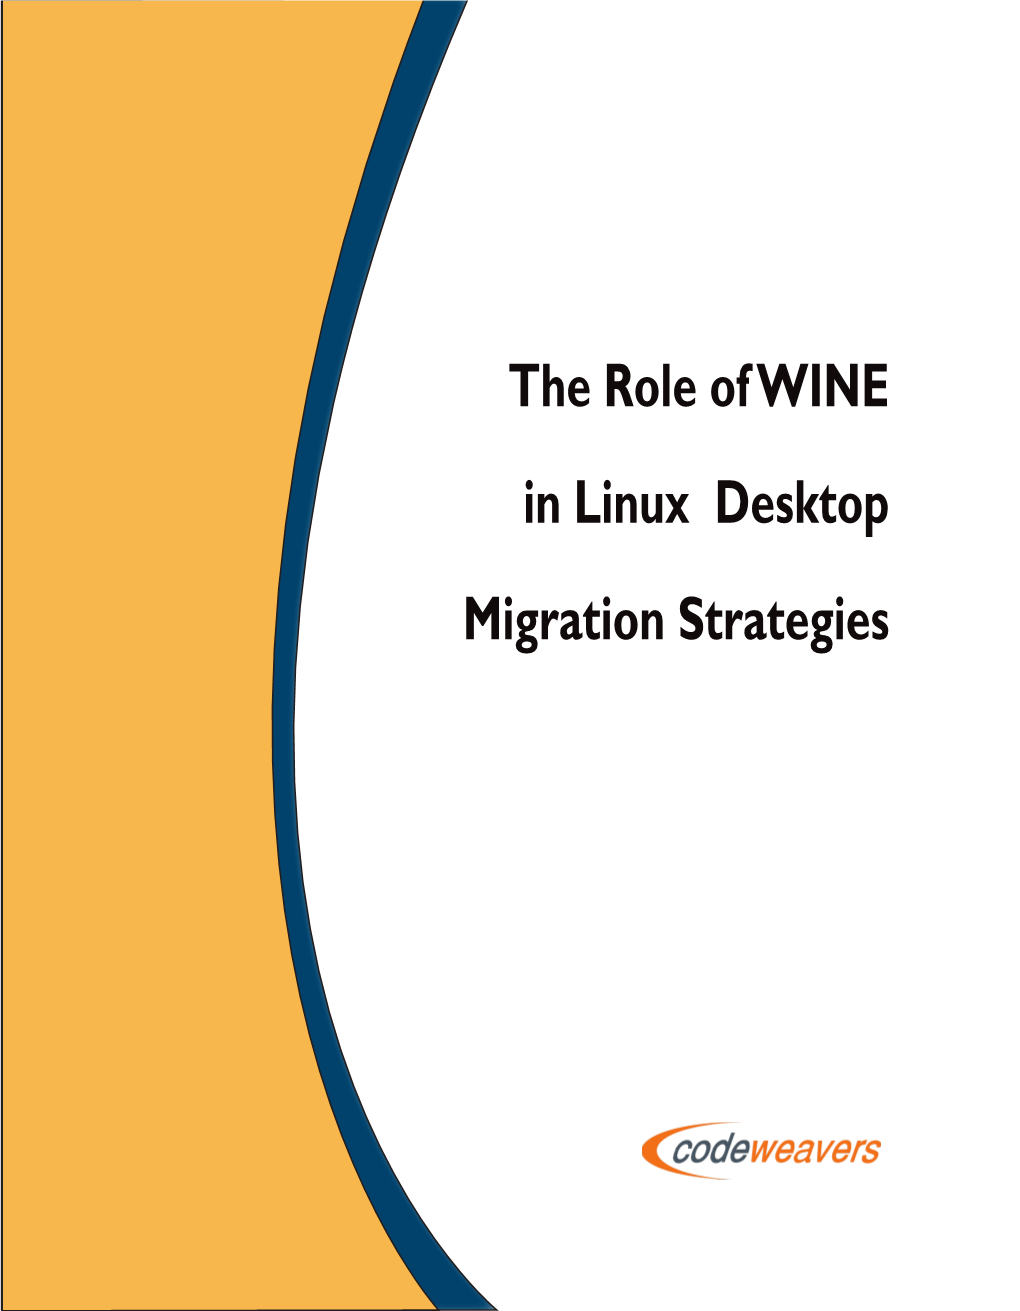 The Role of Wine in Linux Desktop Migration Strategies